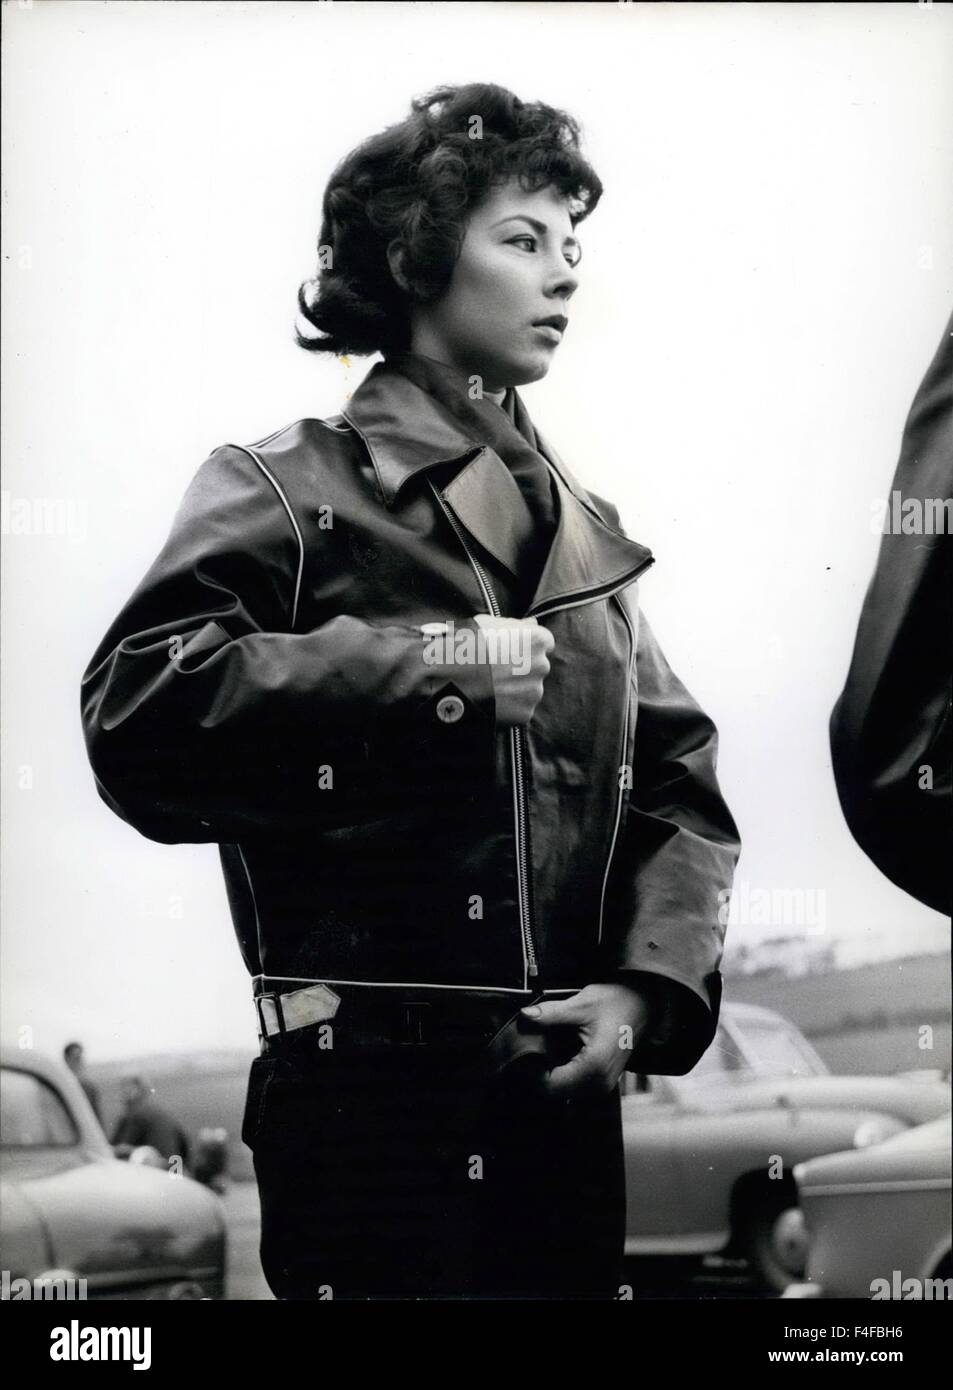 Feb. 24, 1963 - Keep out the cold: Ivy Holmes, 16, of Maidstone zippers up her jacket against brisk air-flow of racing motorcycles. © Keystone Pictures USA/ZUMAPRESS.com/Alamy Live News Stock Photo